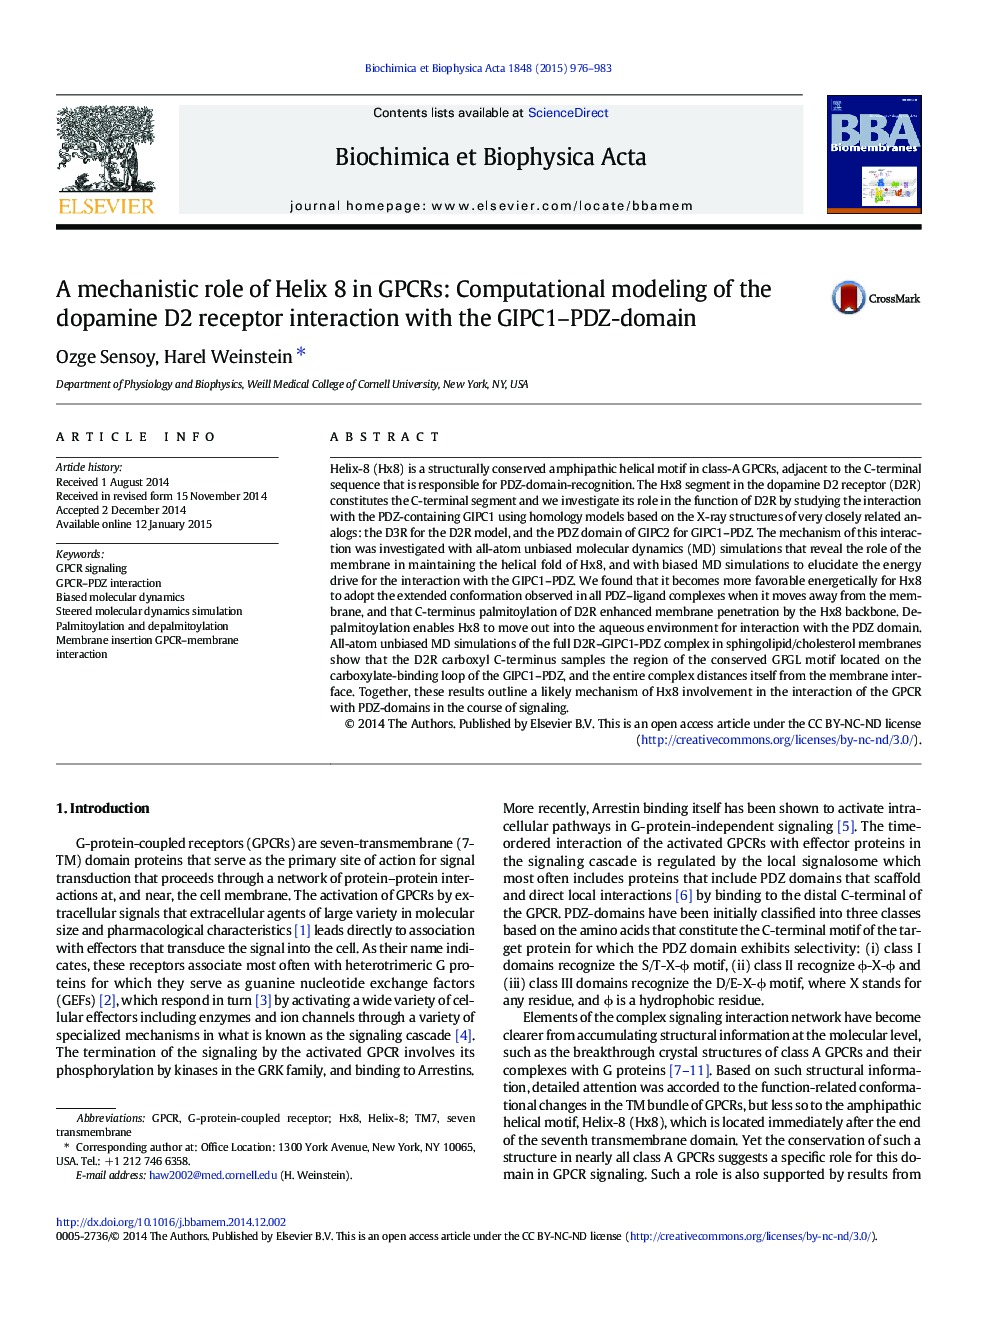 A mechanistic role of Helix 8 in GPCRs: Computational modeling of the dopamine D2 receptor interaction with the GIPC1-PDZ-domain